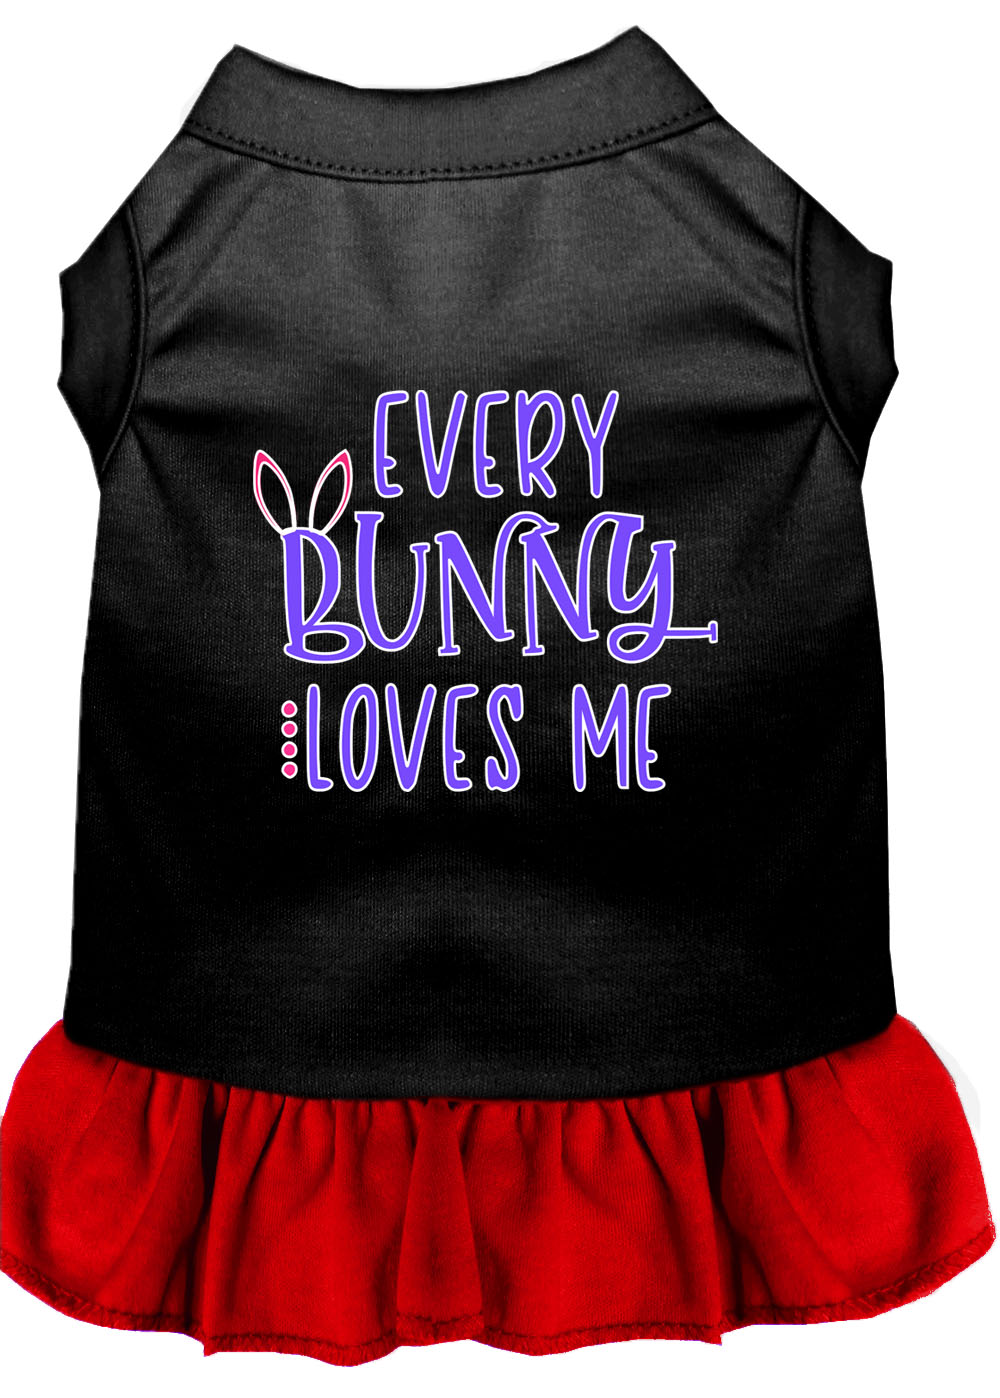 Every Bunny Loves me Screen Print Dog Dress Black with Red XS